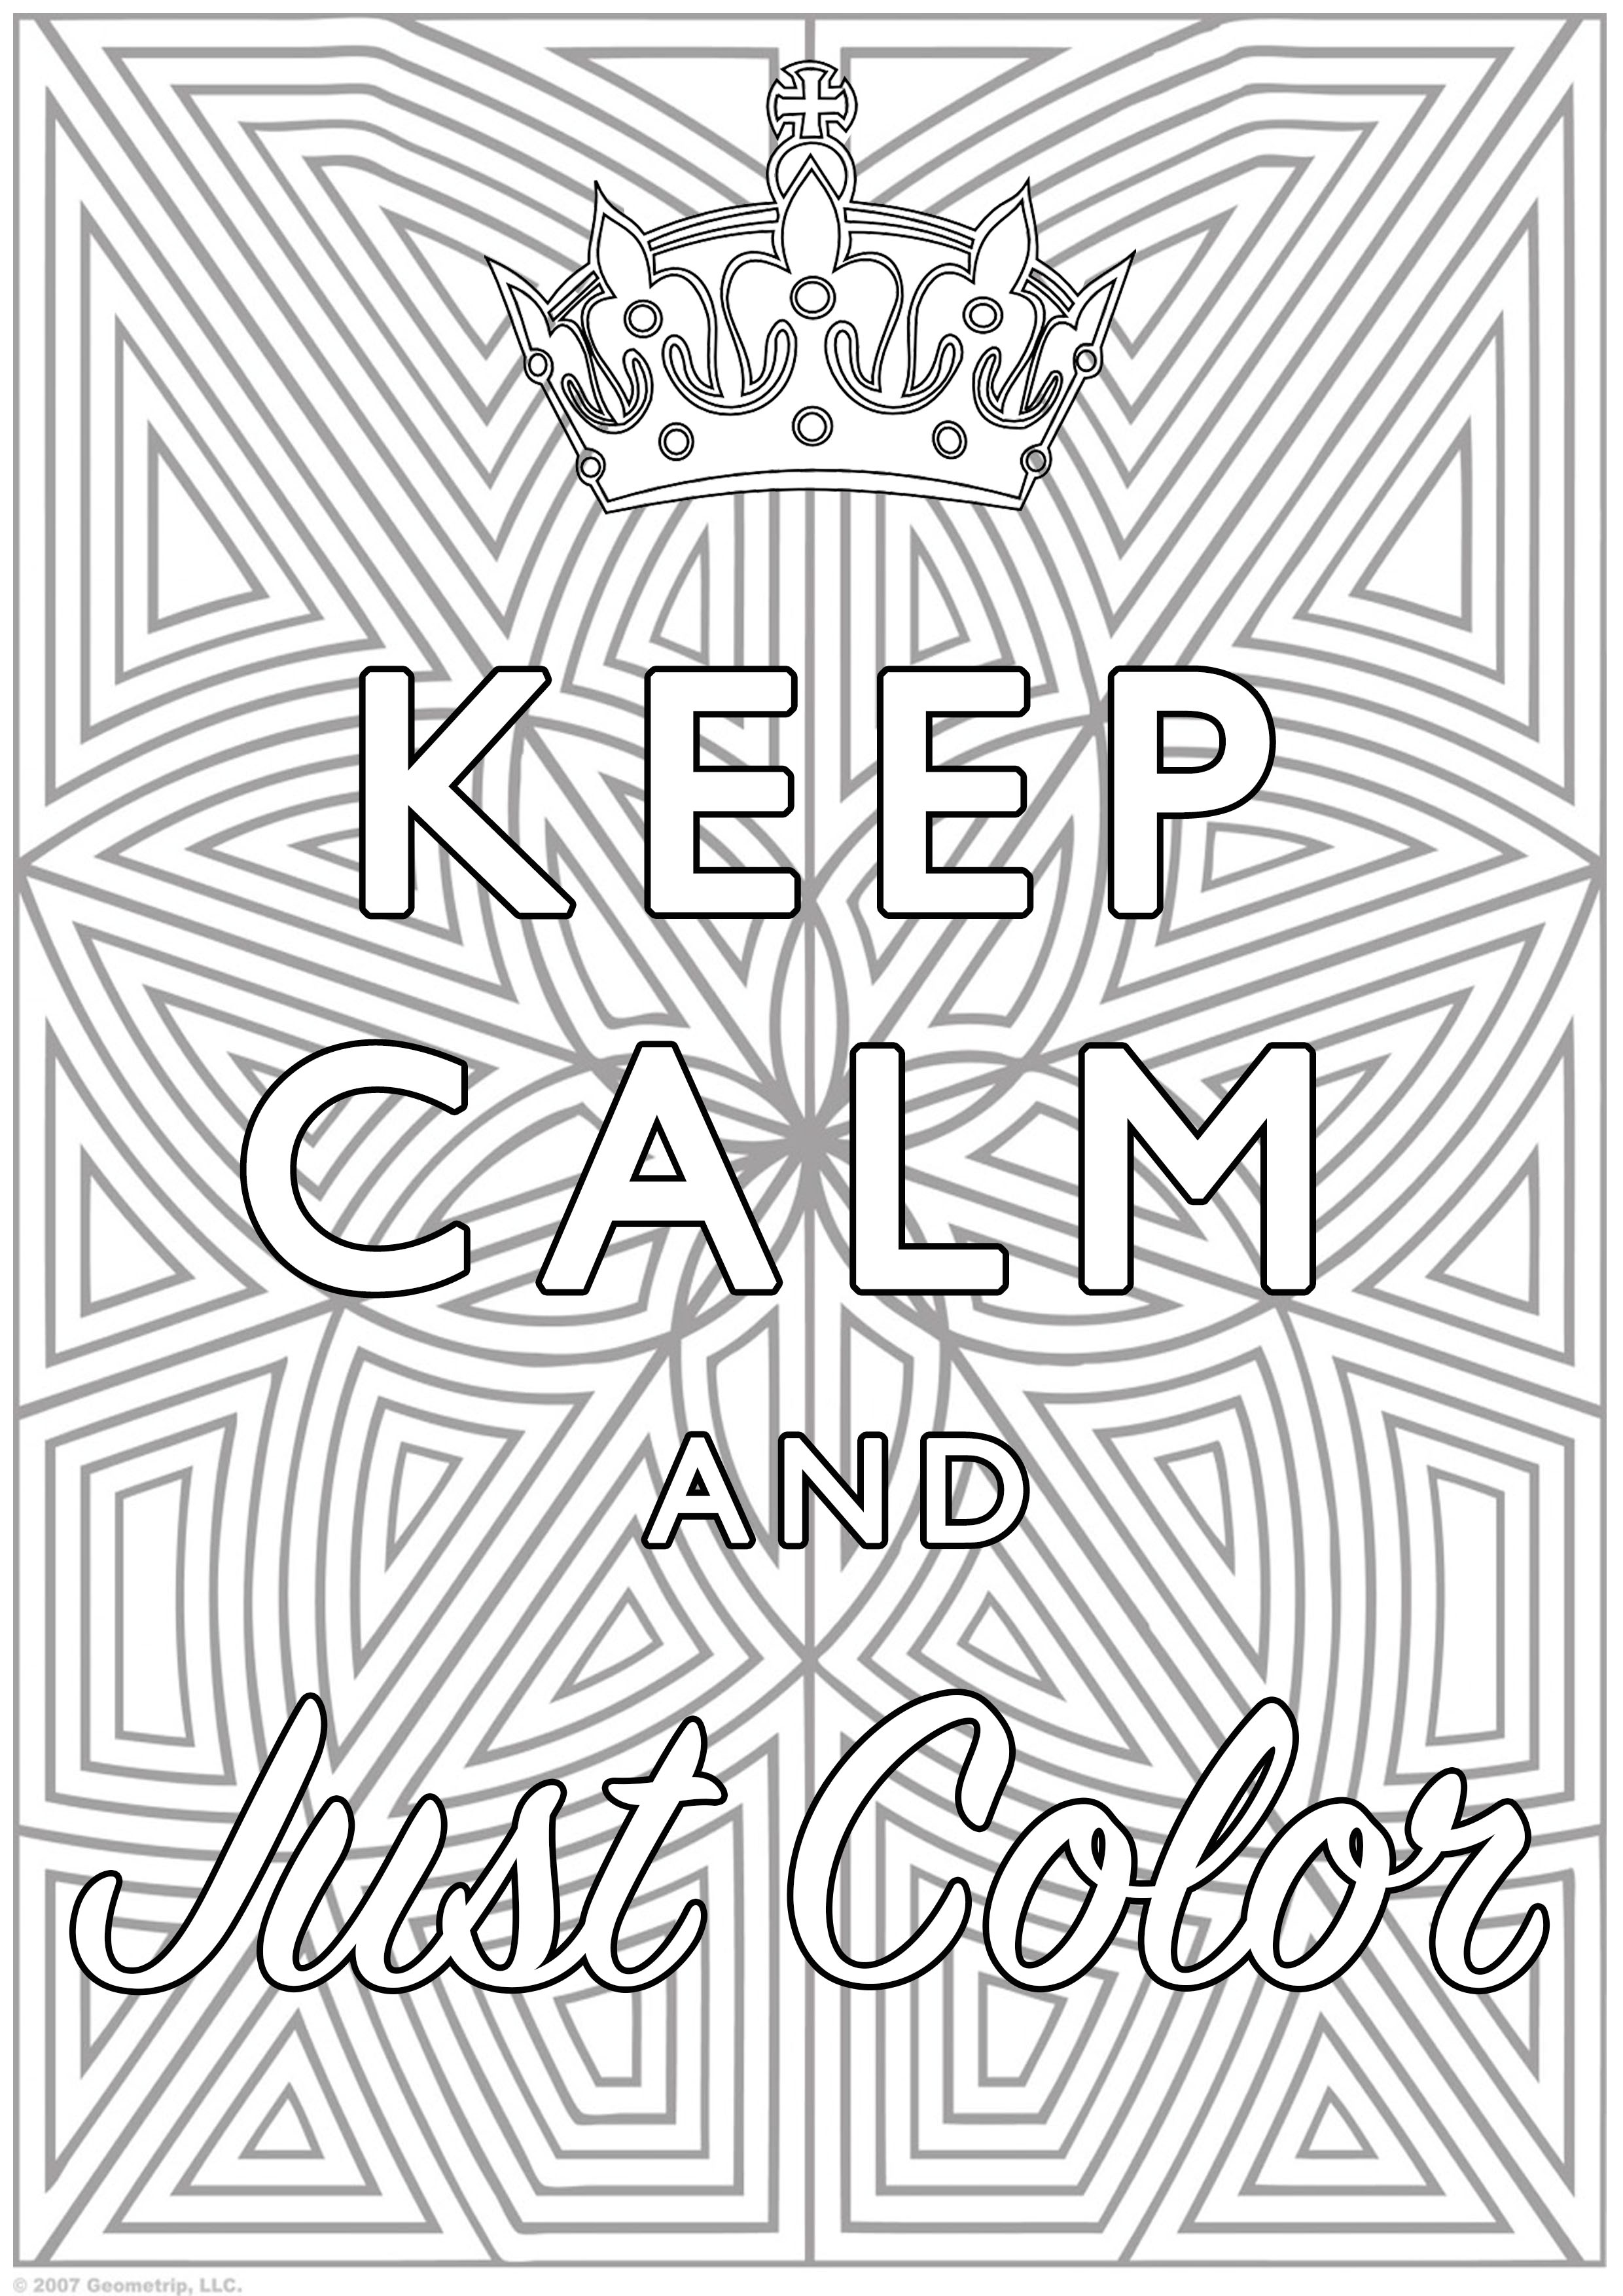 Keep Calm and Color Keep calm  Adult Coloring Pages